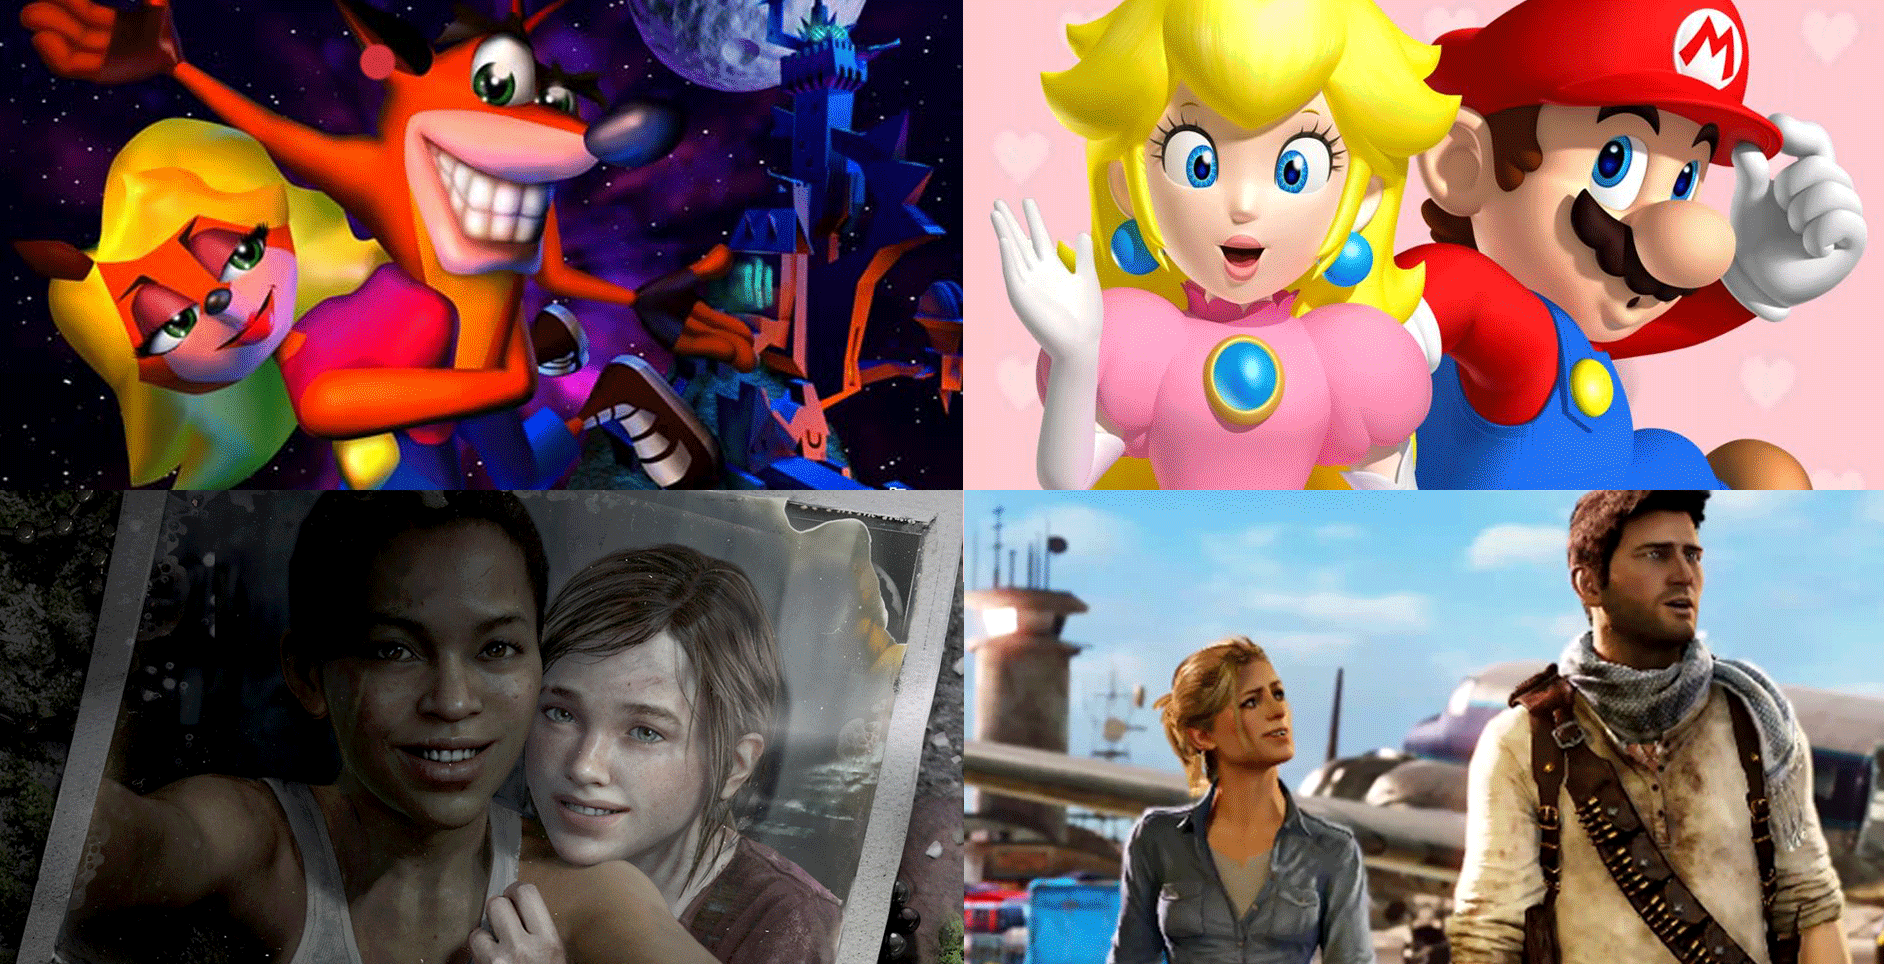 The 10 Best Games to Play as a Couple